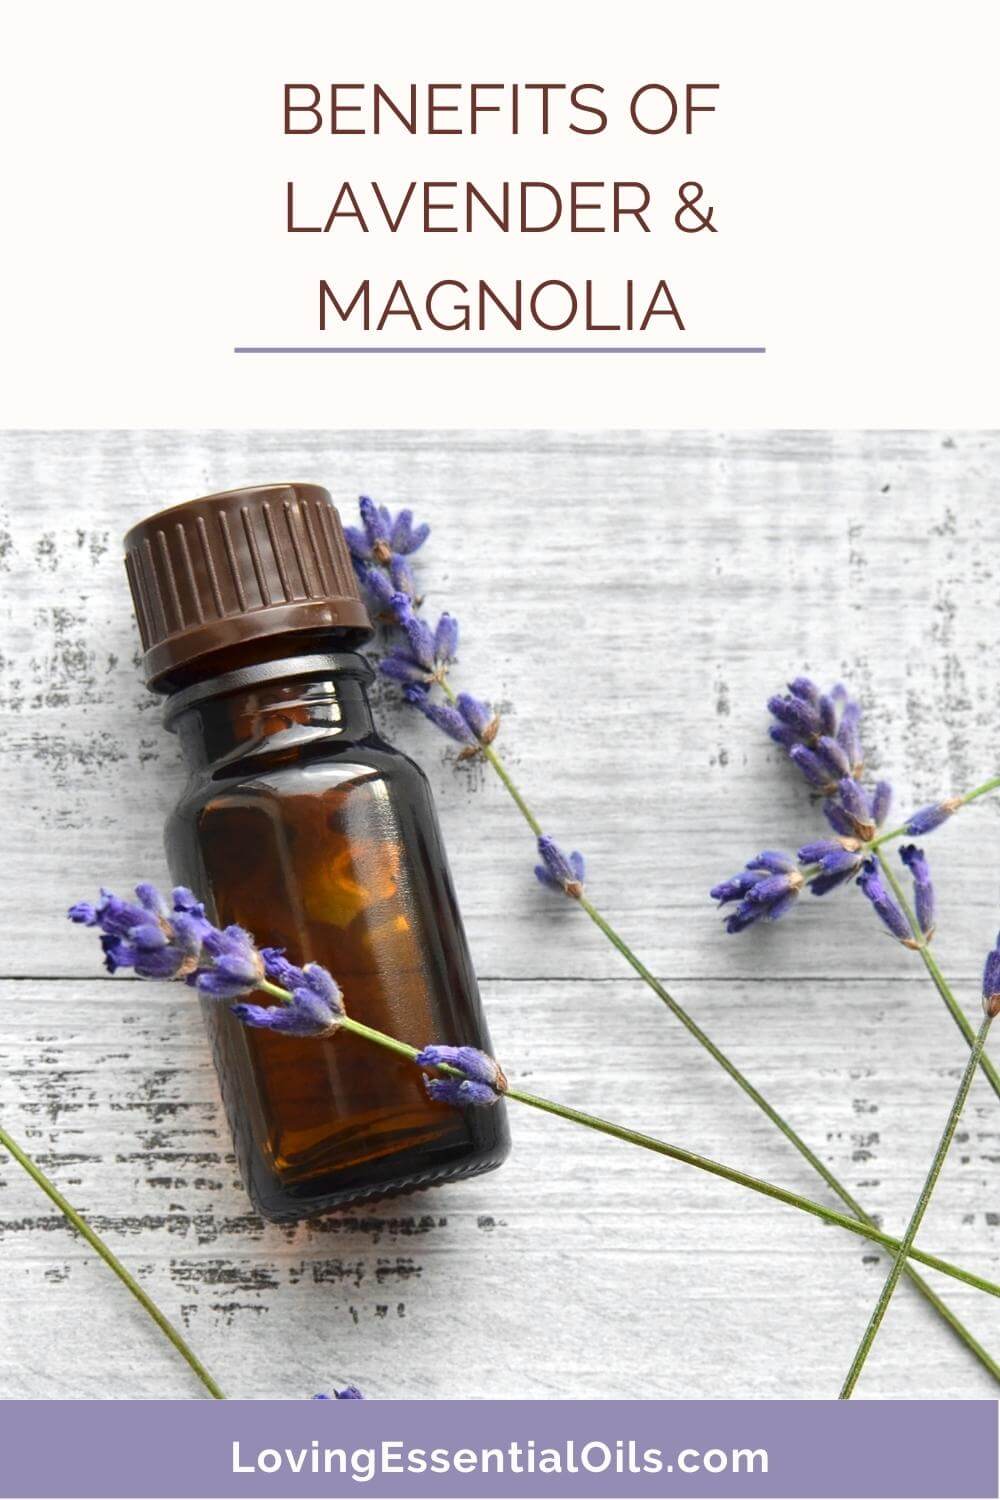 Benefits of Lavender and Magnolia by Loving Essential Oils